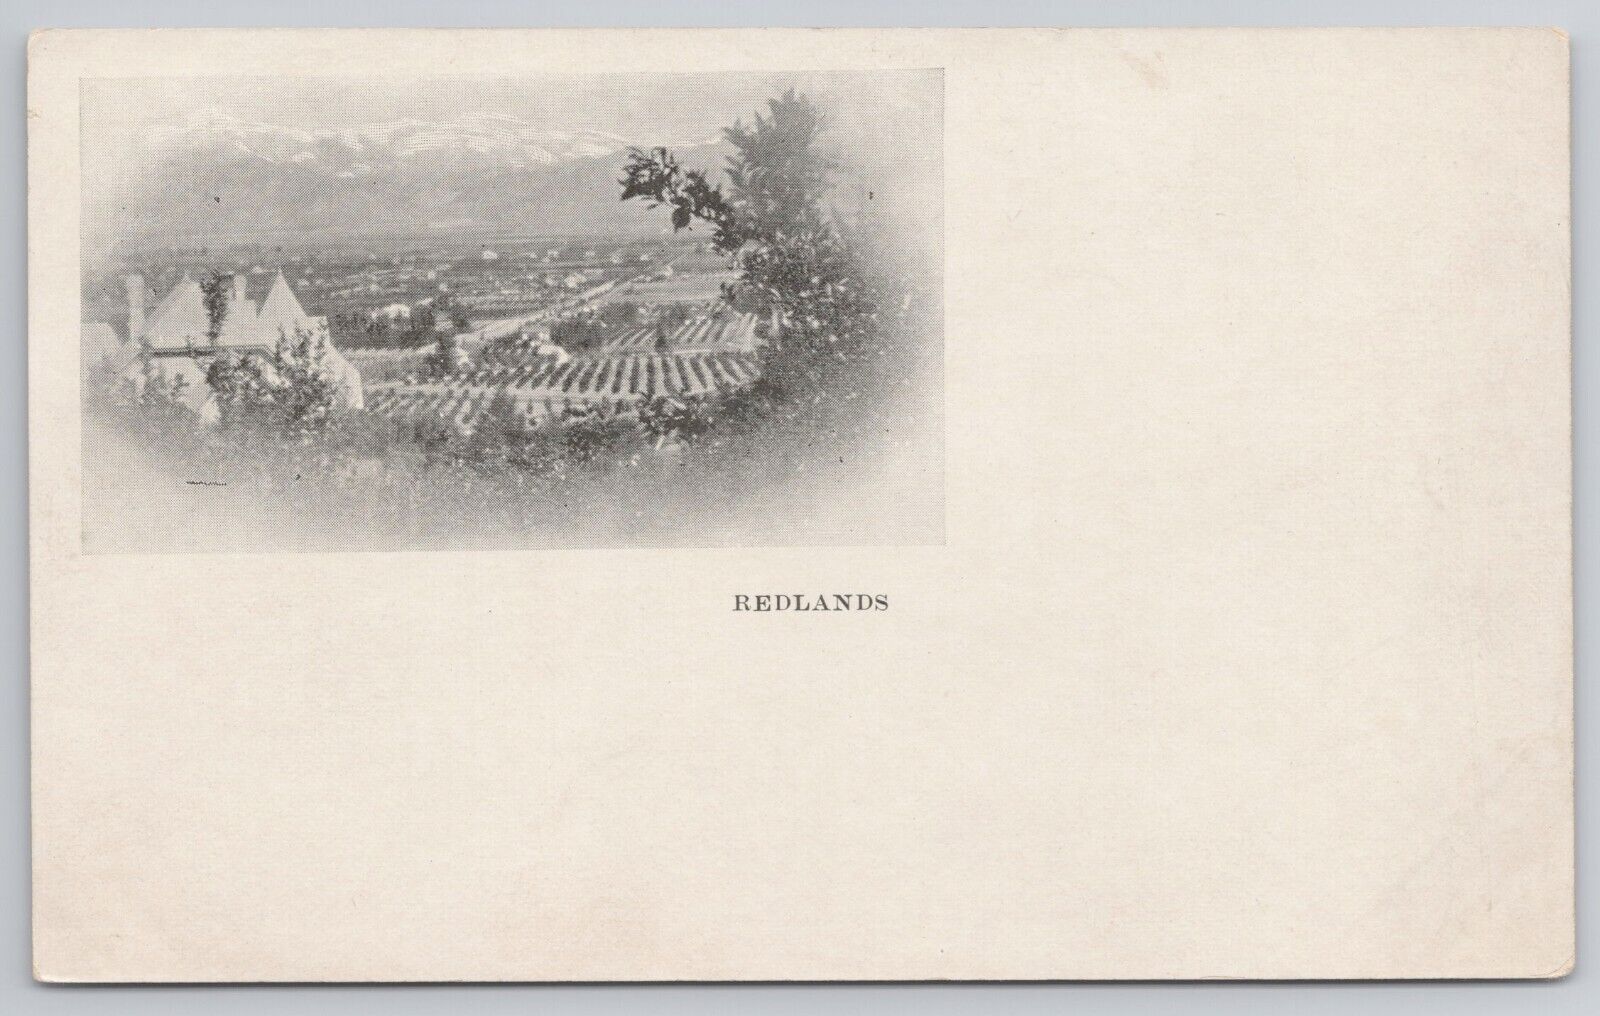 View of  Redlands California CA 1898-1901 Private Mailing Card Postcard PMC